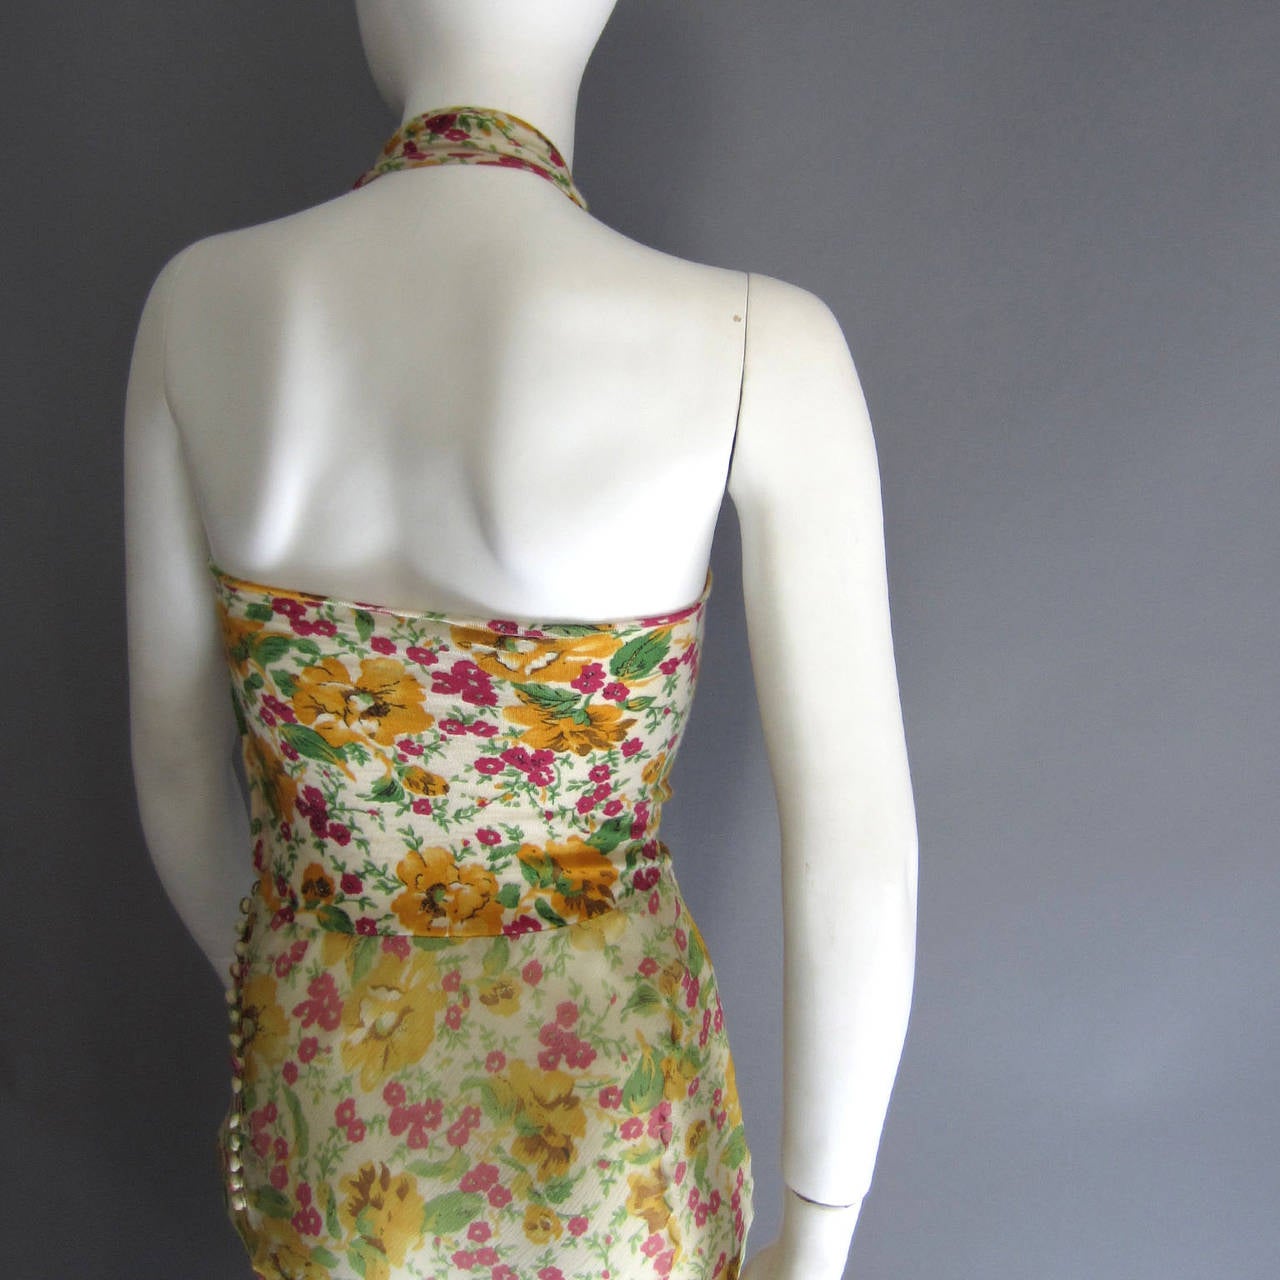 JOHN GALLIANO for CHRISTIAN DIOR Floral Cashmere and Chiffon Bias Gown 1